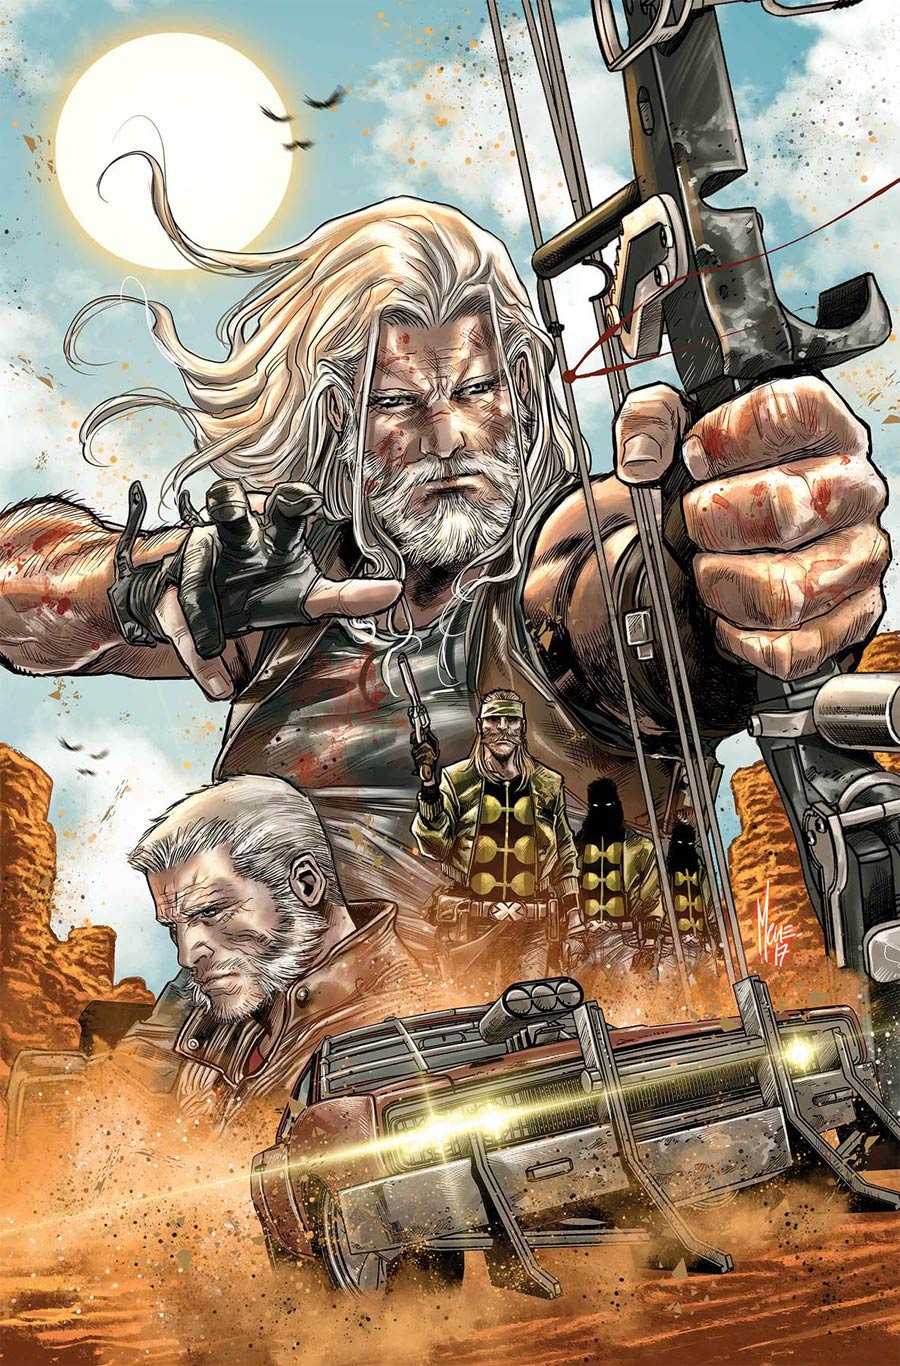 Old Man Hawkeye #1 By Marco Checchetto Poster